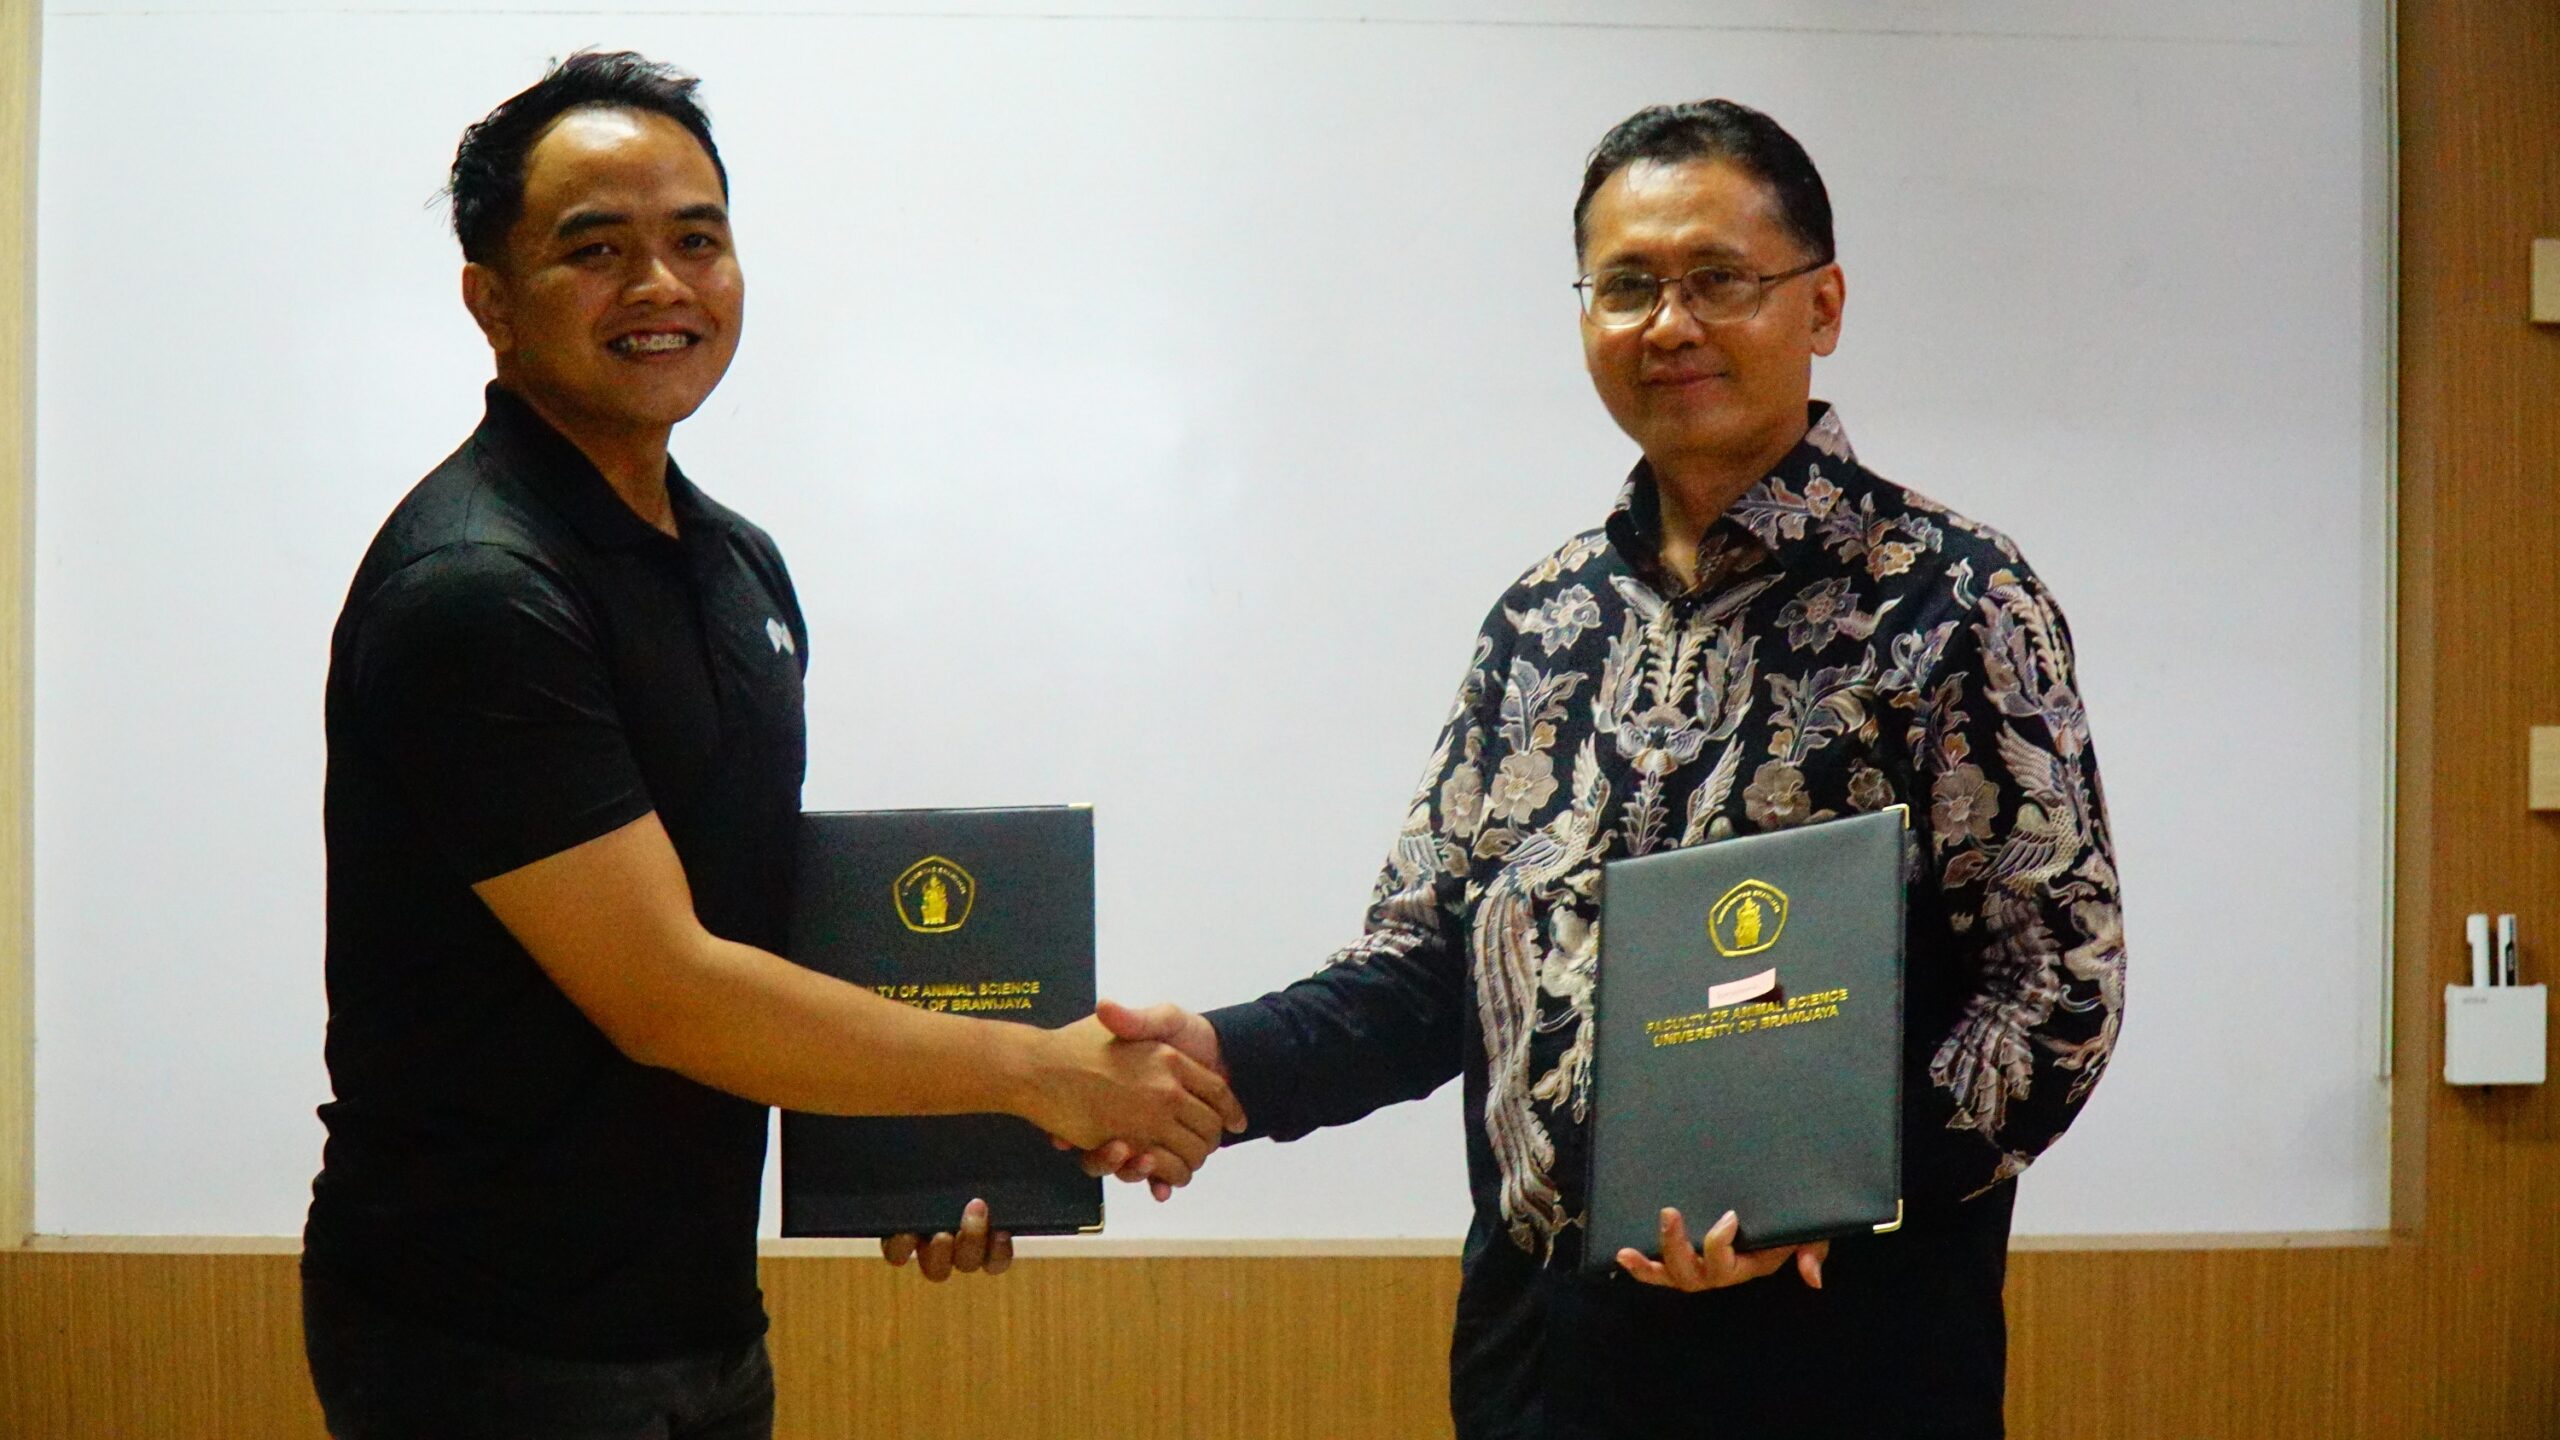 Strategic Collaboration Between the Faculty of Pharmacy, University of North Sumatra and the Faculty of Animal Husbandry, Brawijaya University to Improve Education, Research and Community Service